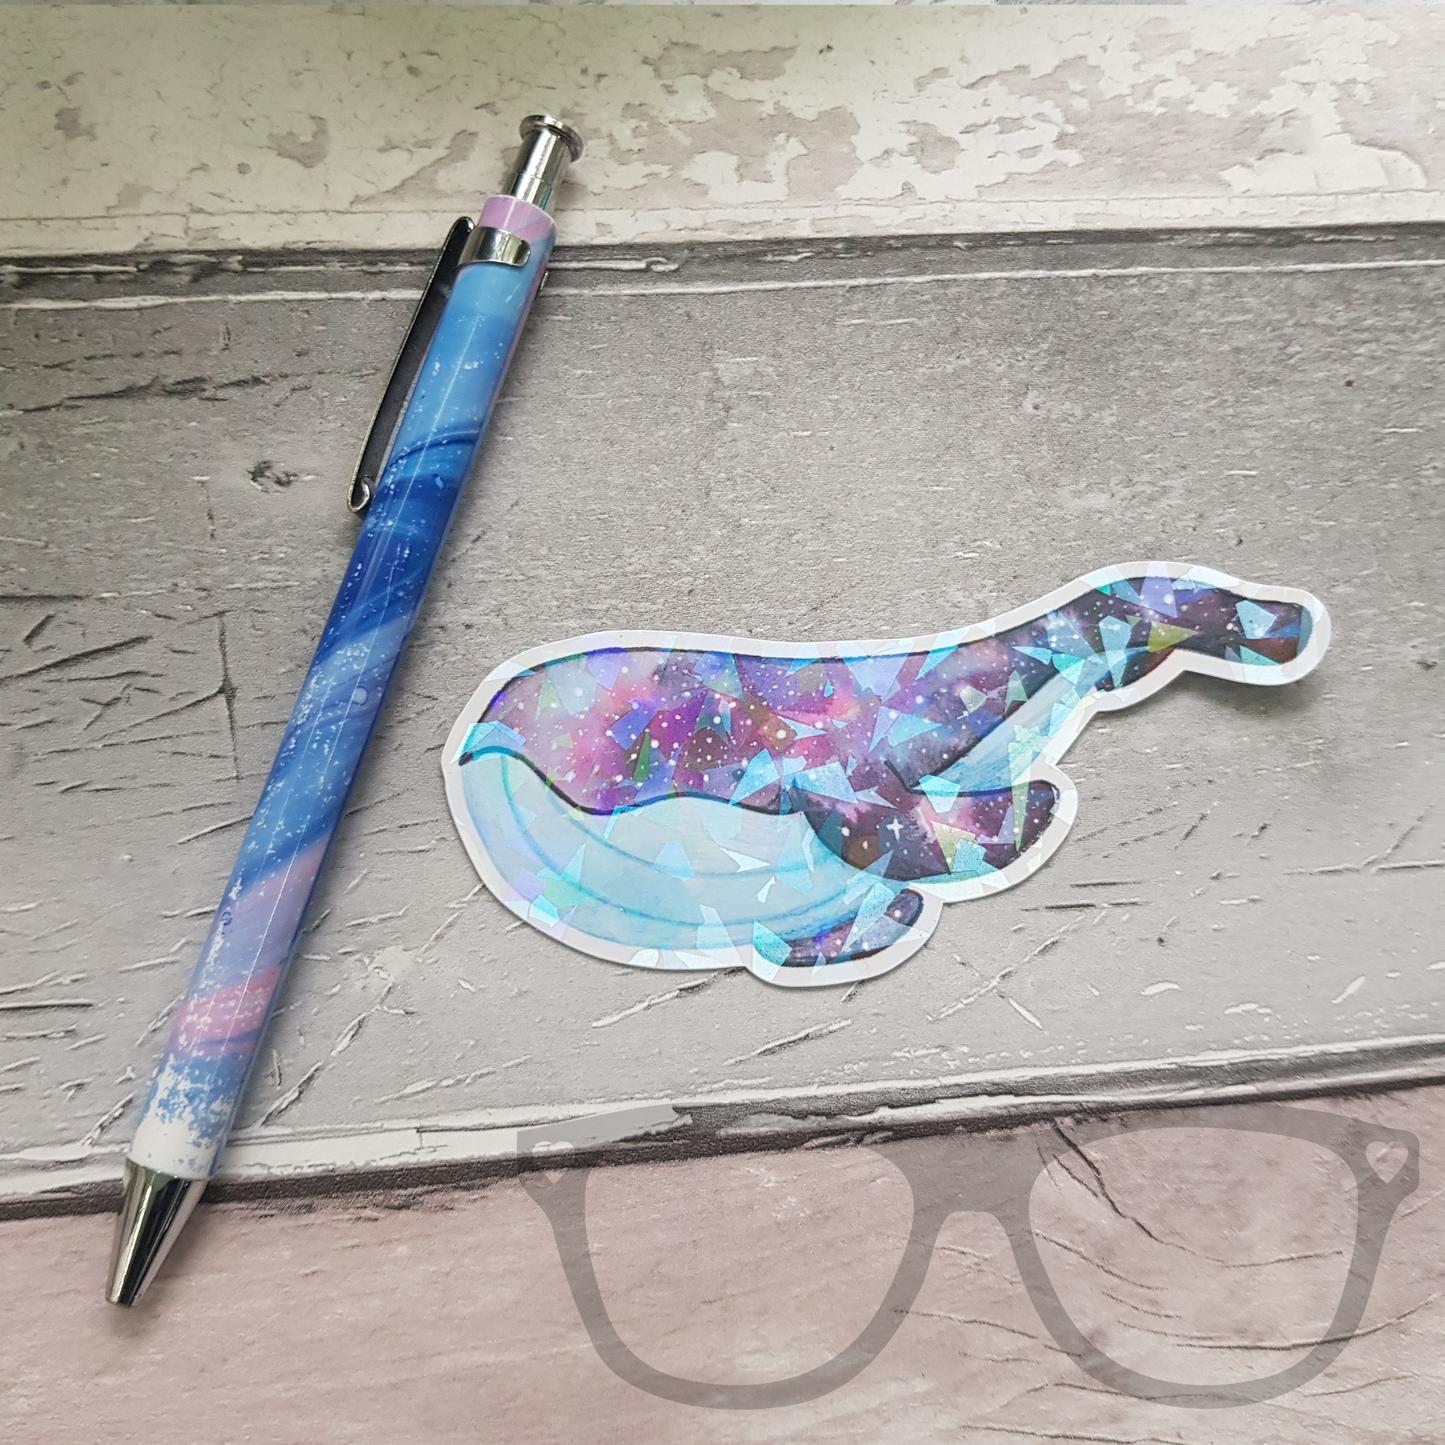 Sparkling Space whale sticker next to a pen to show scale